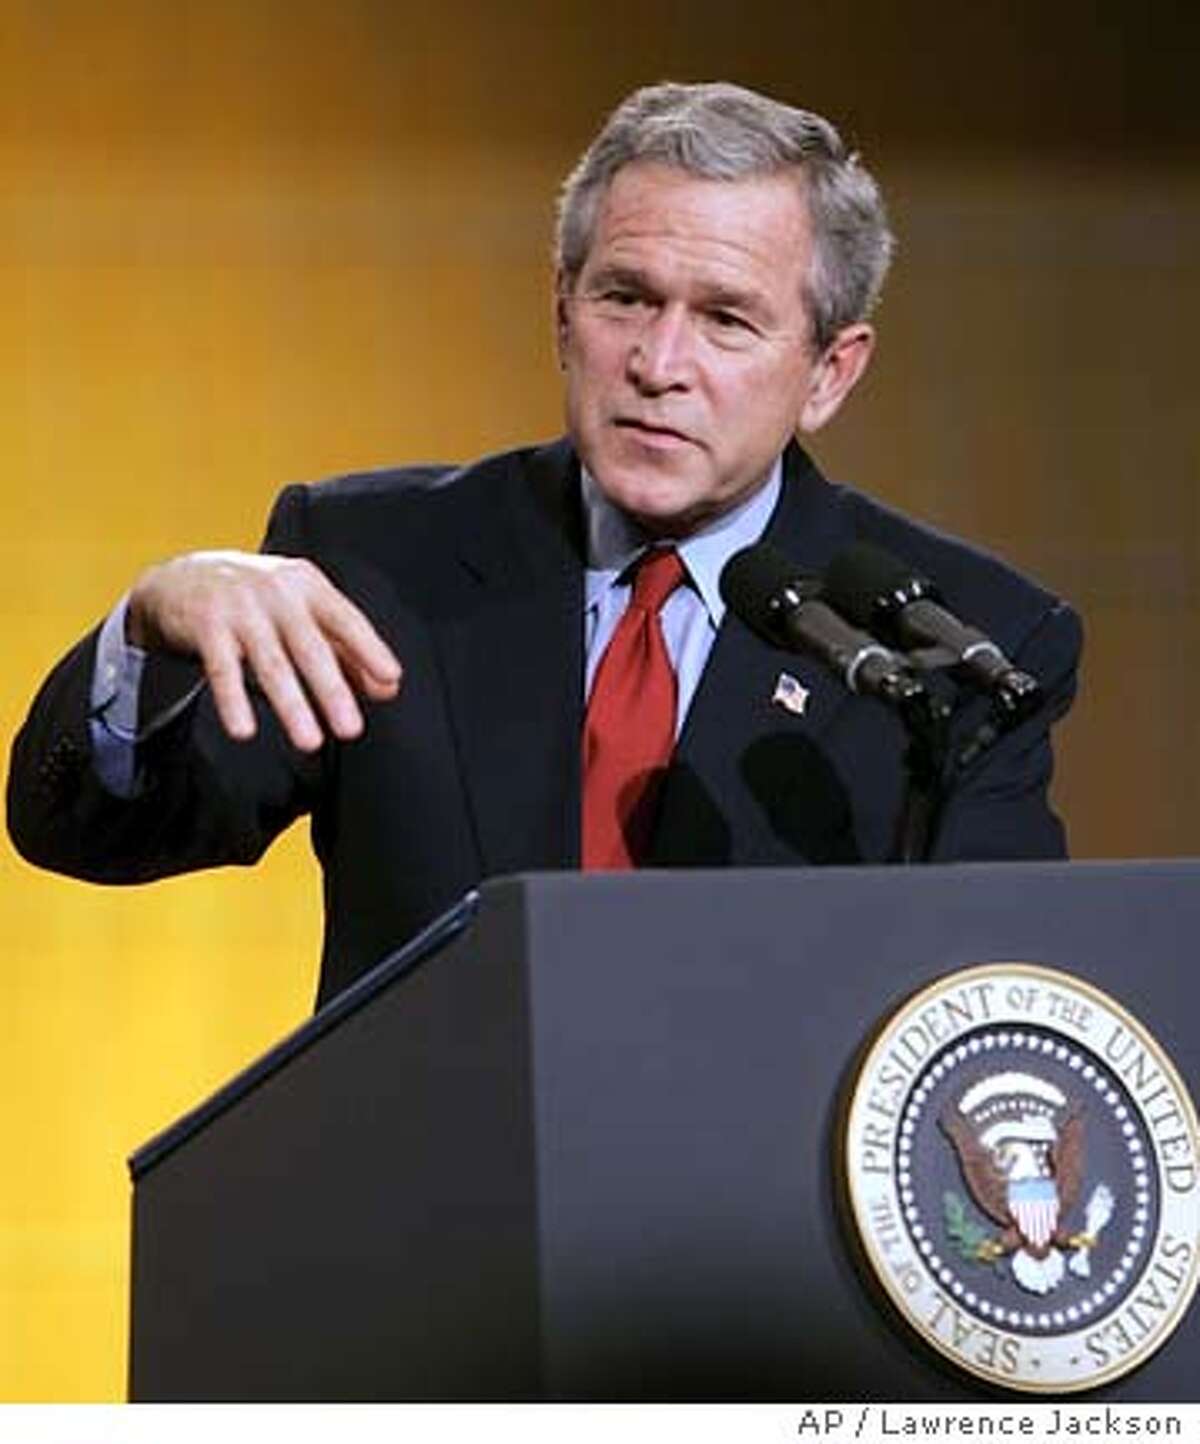 President Bush makes closing remarks at the White House Conference on the Economy: Financial Challenges for Today and Tomorrow, Thursday, Dec. 16, 2004, at the Ronald Reagan Building in Washington. President Bush wraps up a two-day economic conference with sessions on jobs and Social Security reform. (AP Photo/Lawrence Jackson)